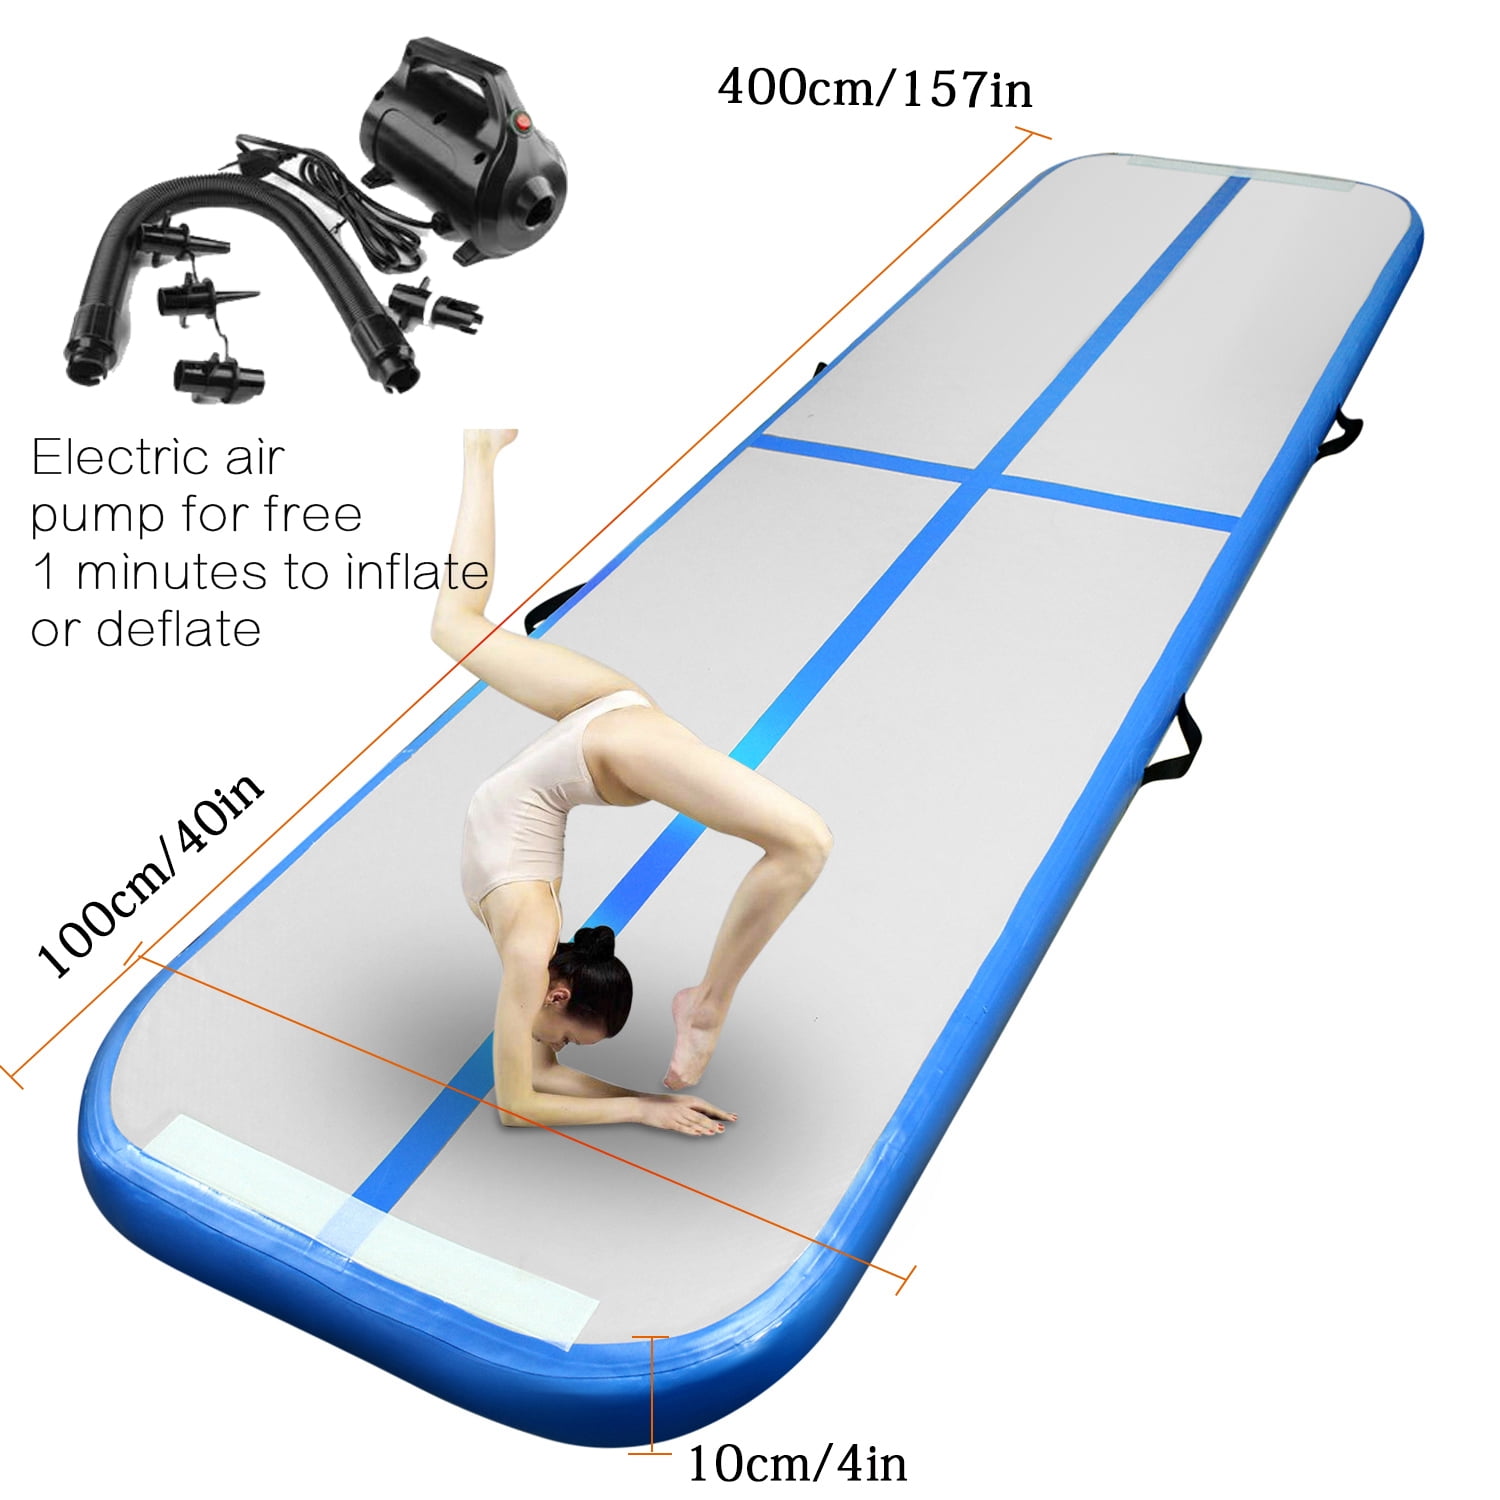 Gymnastics Mat CHENGLE 10ft/13ft/16ft/20ft Inflatable Air Mat Tumble Track 4 inches thickness Tumbling Mat with Electric Pump for Cheerleading/Practice Gymnastics/Beach/Park/Home use 